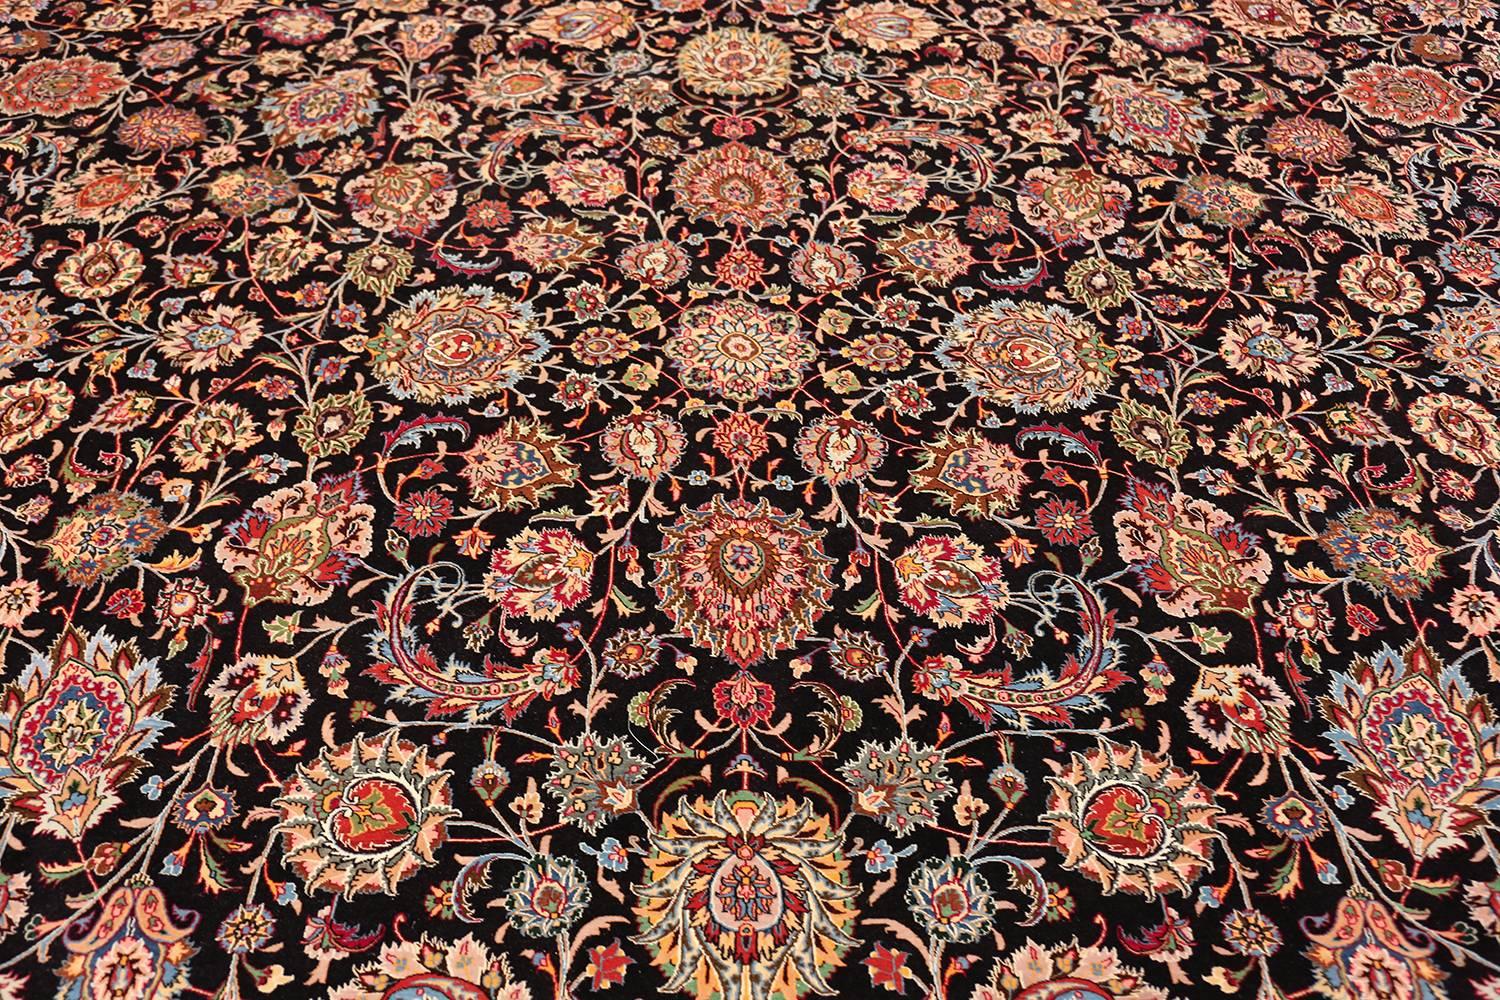 Silk and Wool Vintage Khorassan Persian Rug. Size: 11' 3